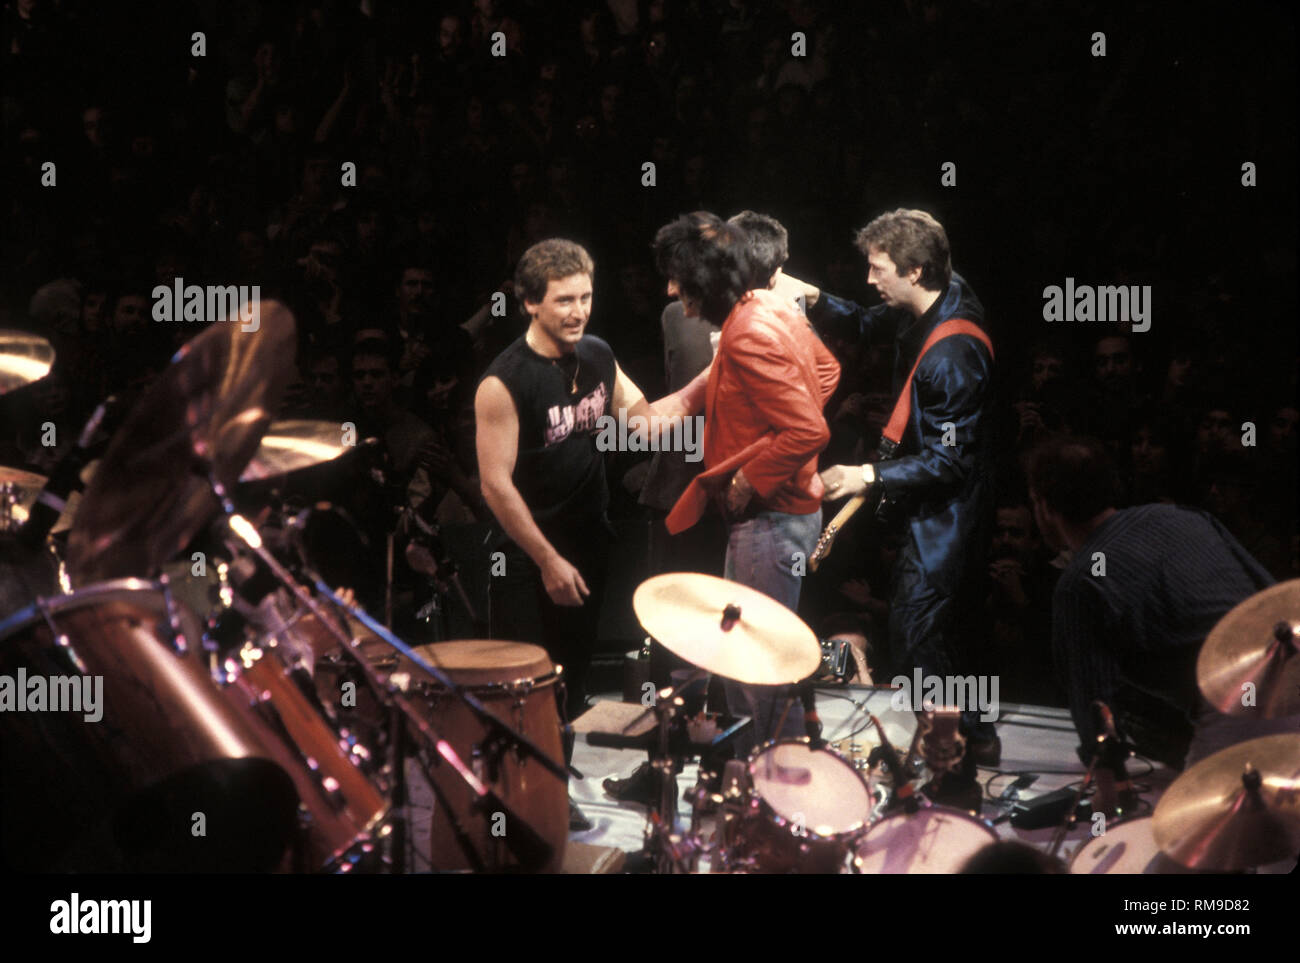 Eric Clapton is shown on stage with Ron Wood, Kenny Jones, and Ronnie Lane during the Ronnie Lanes A.R.M.S. benefit concert at Madison Square Garden. Stock Photo